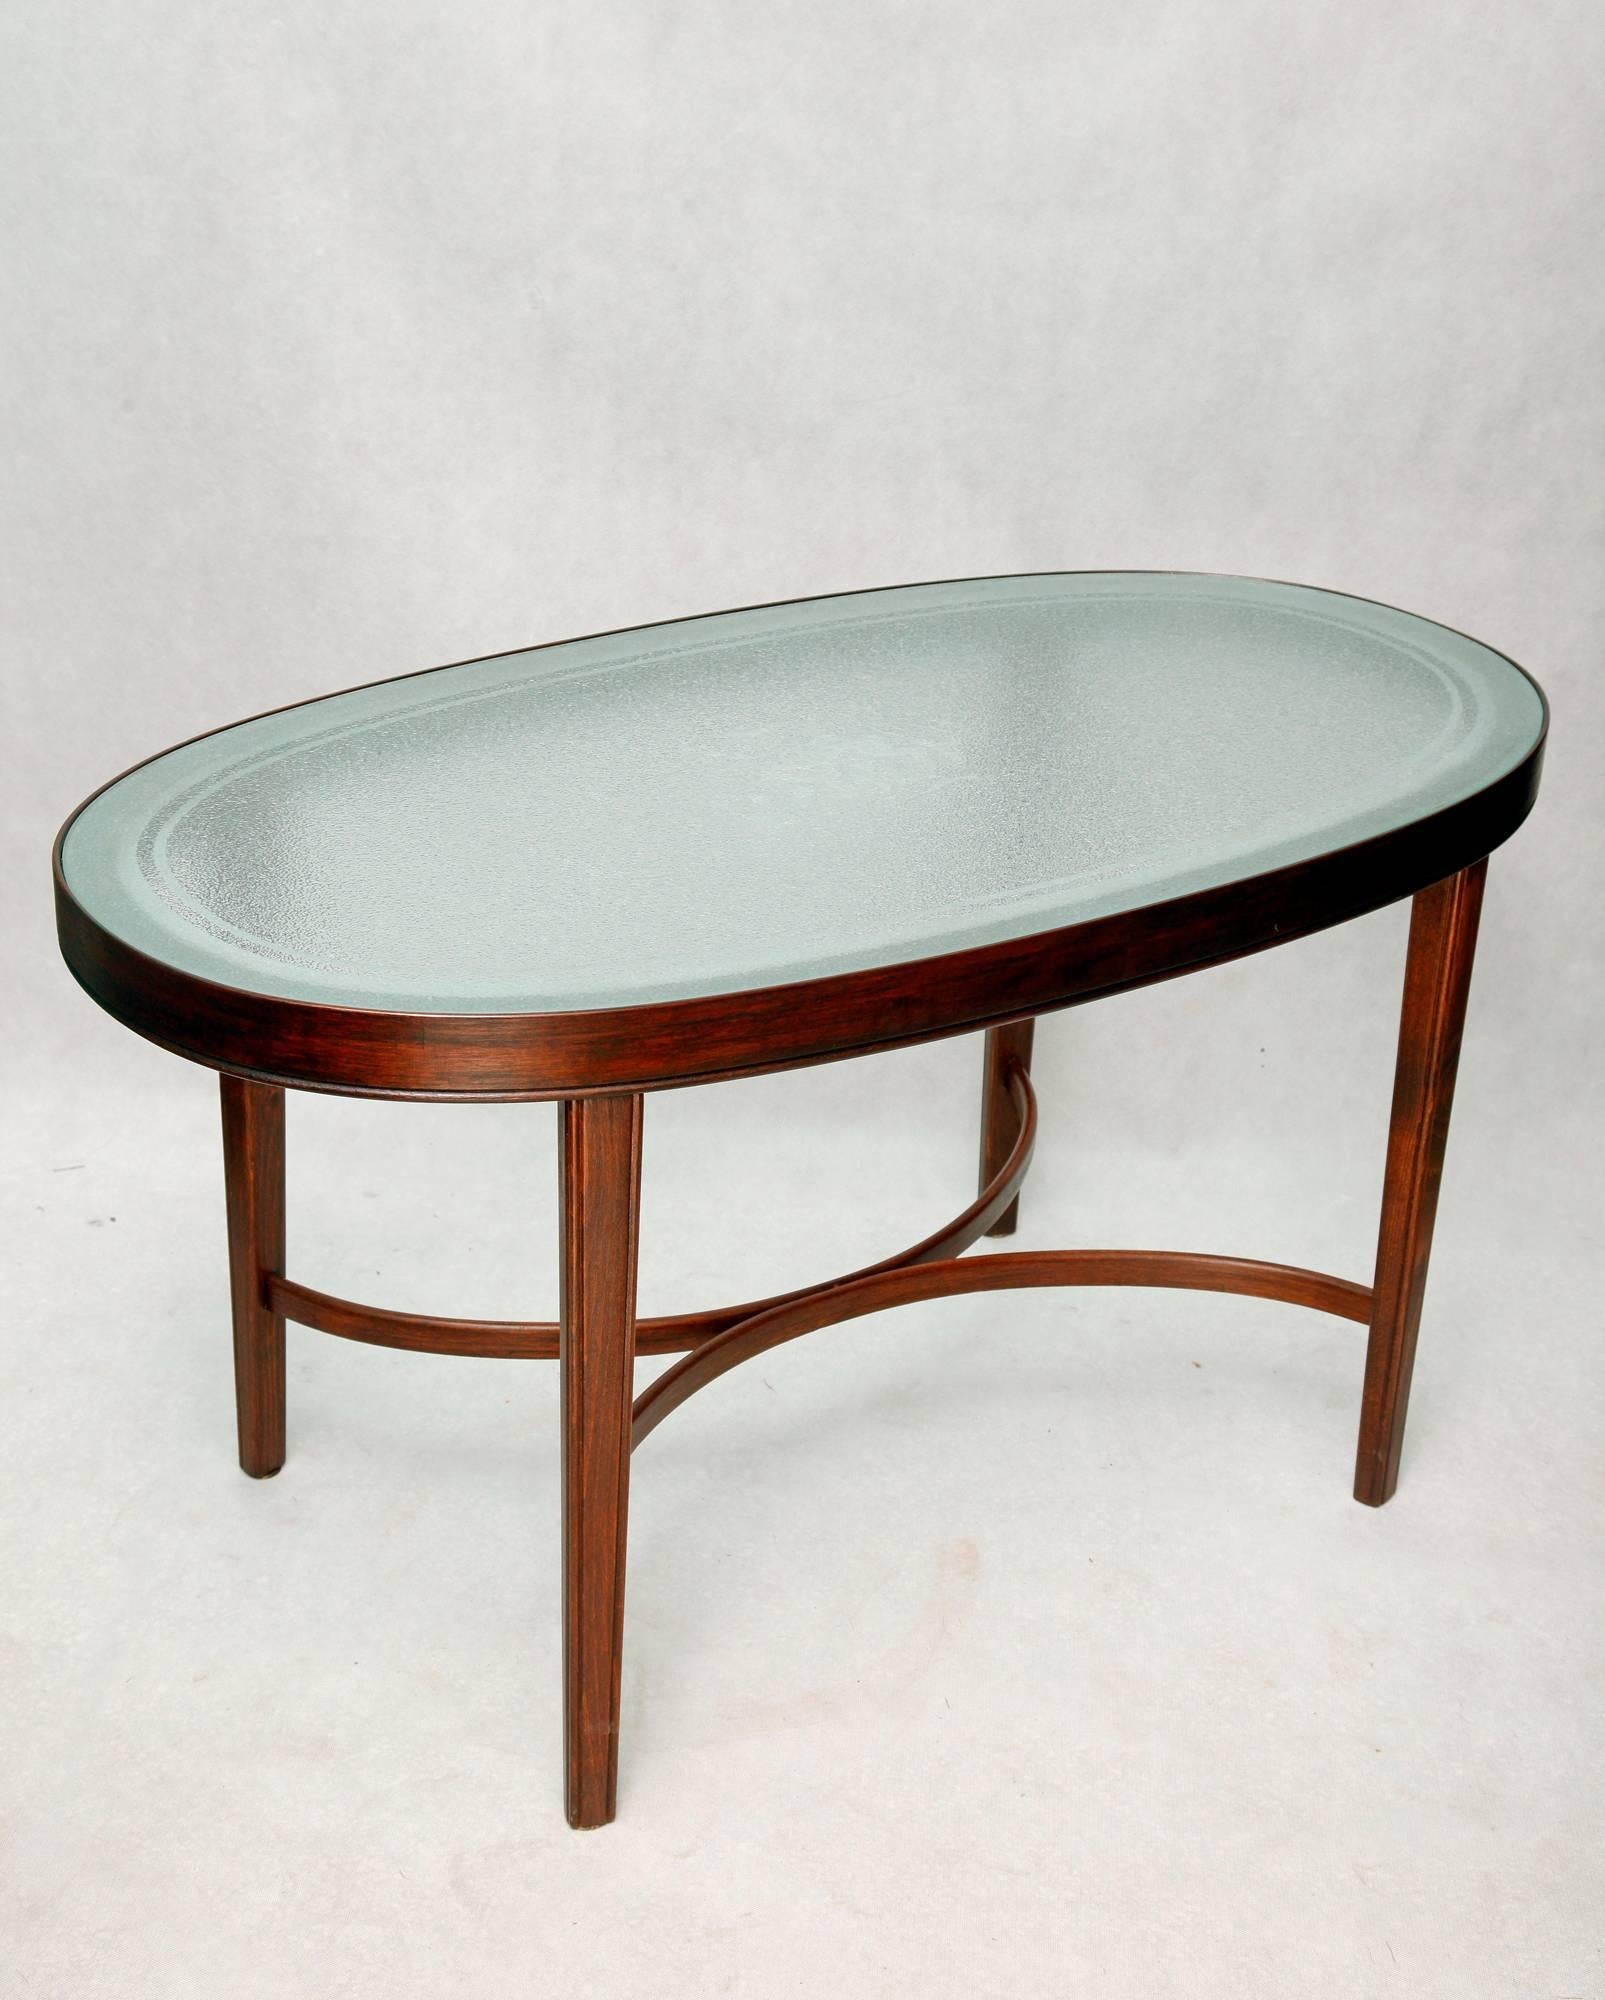 Romantic Beech Coffee Table with a Glass Top, Denmark, 1940s For Sale